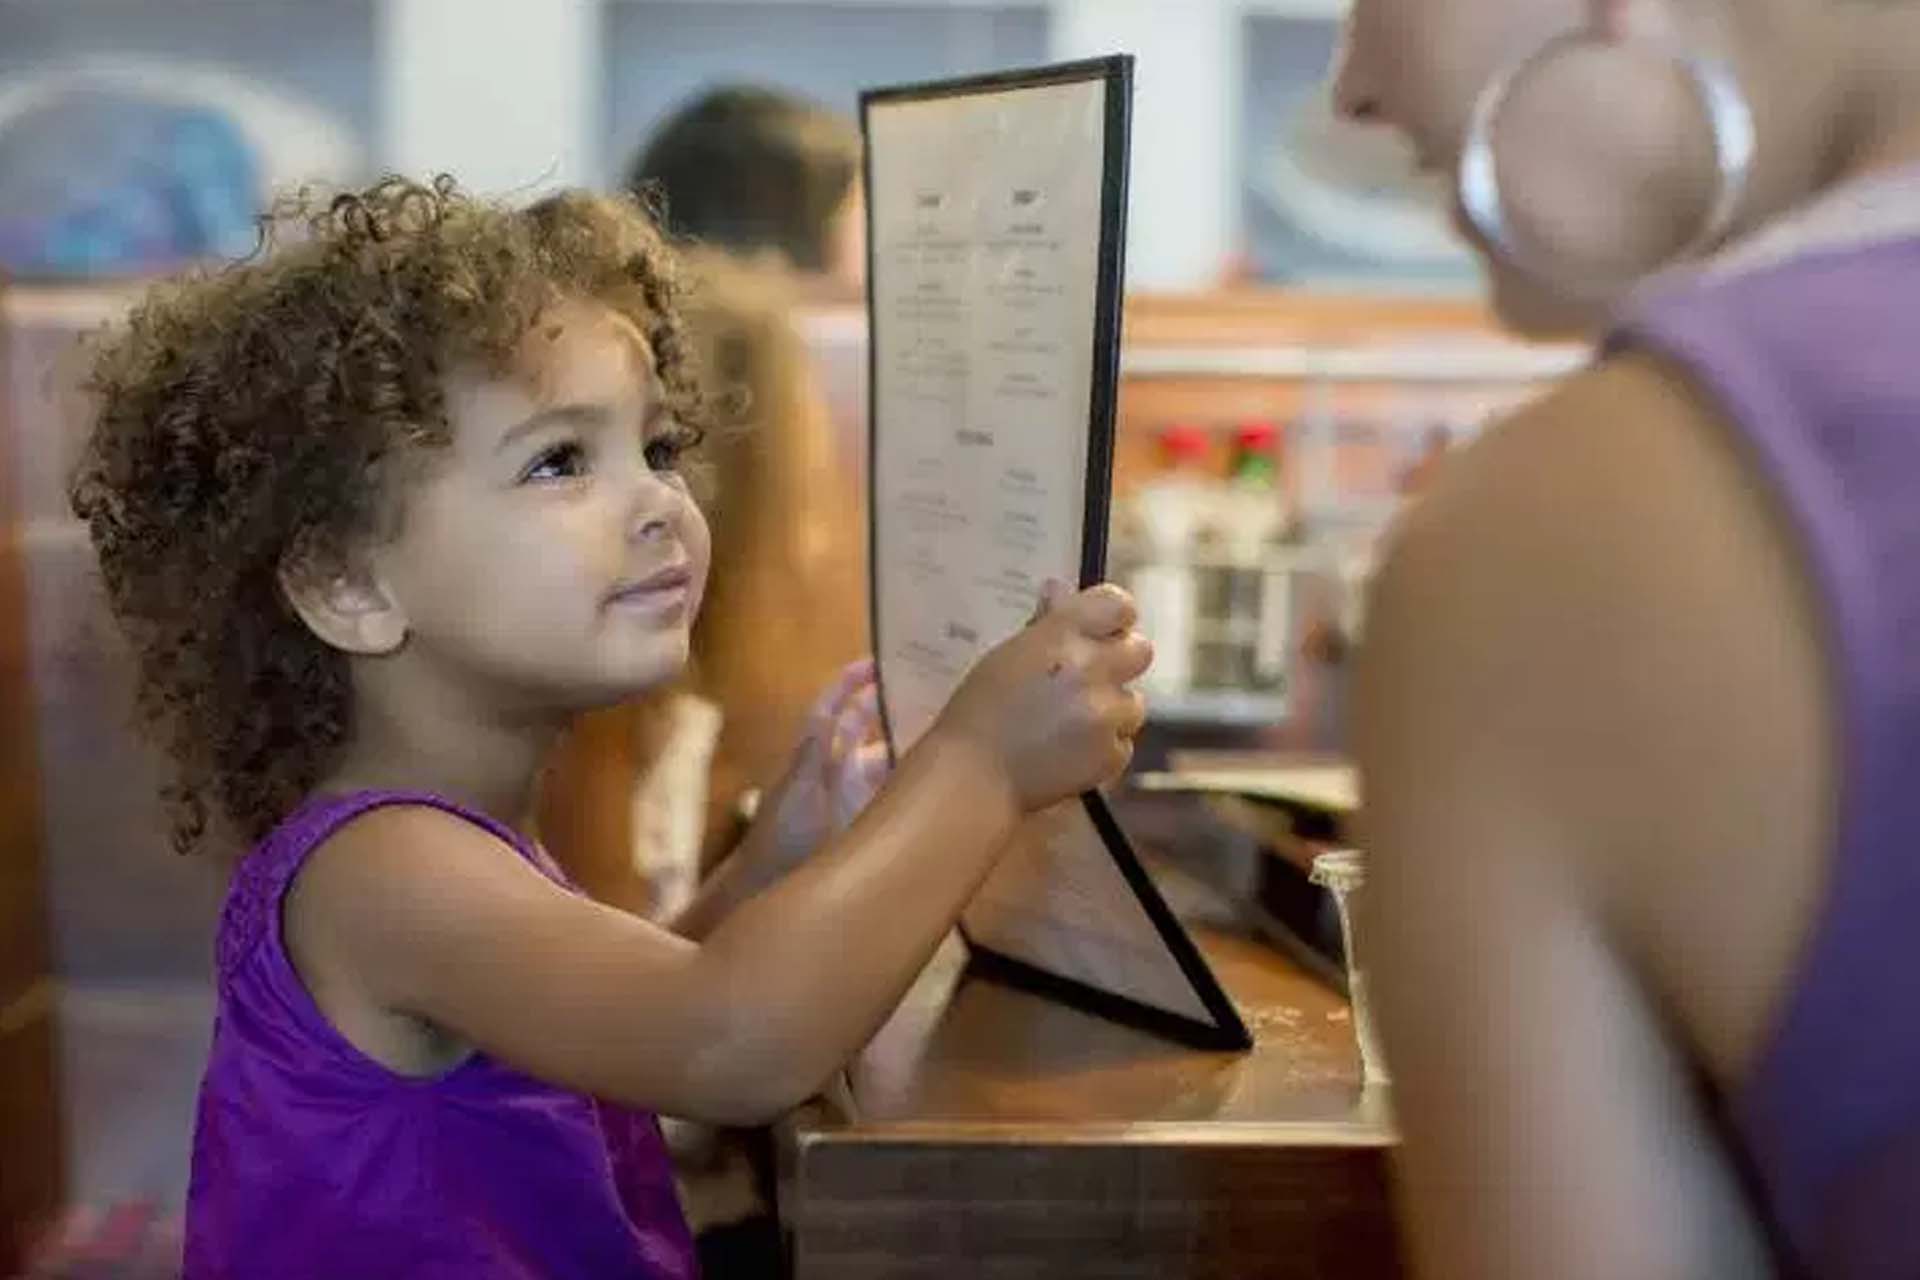 Should parents be rewarded for bringing well-behaved kids to a restaurant